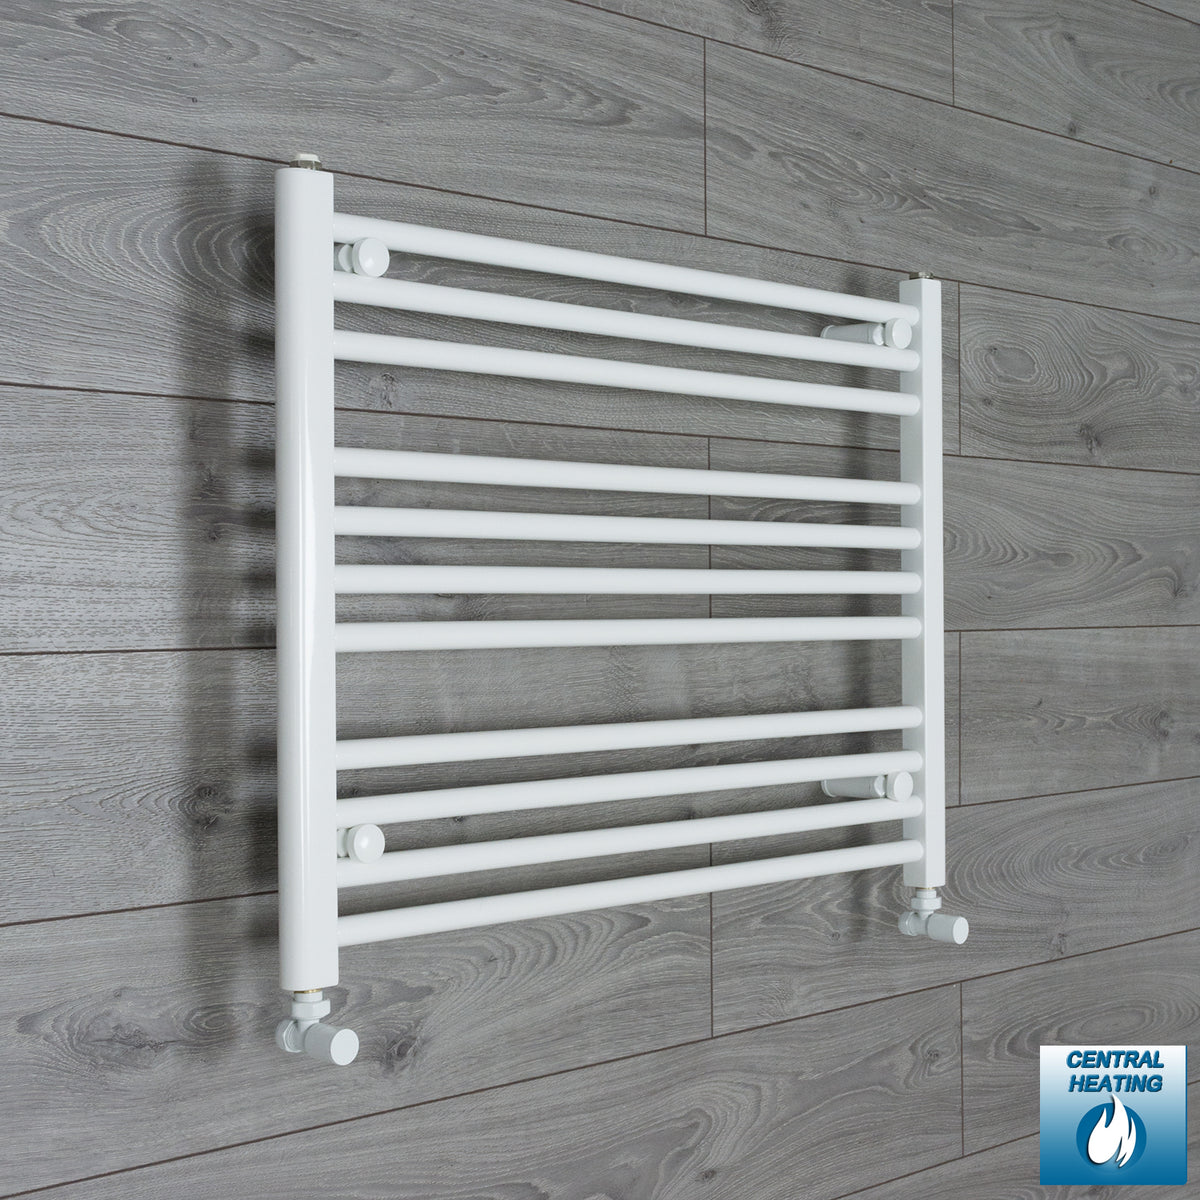 750mm Wide 600mm High White Towel Rail Radiator With Angled Valve